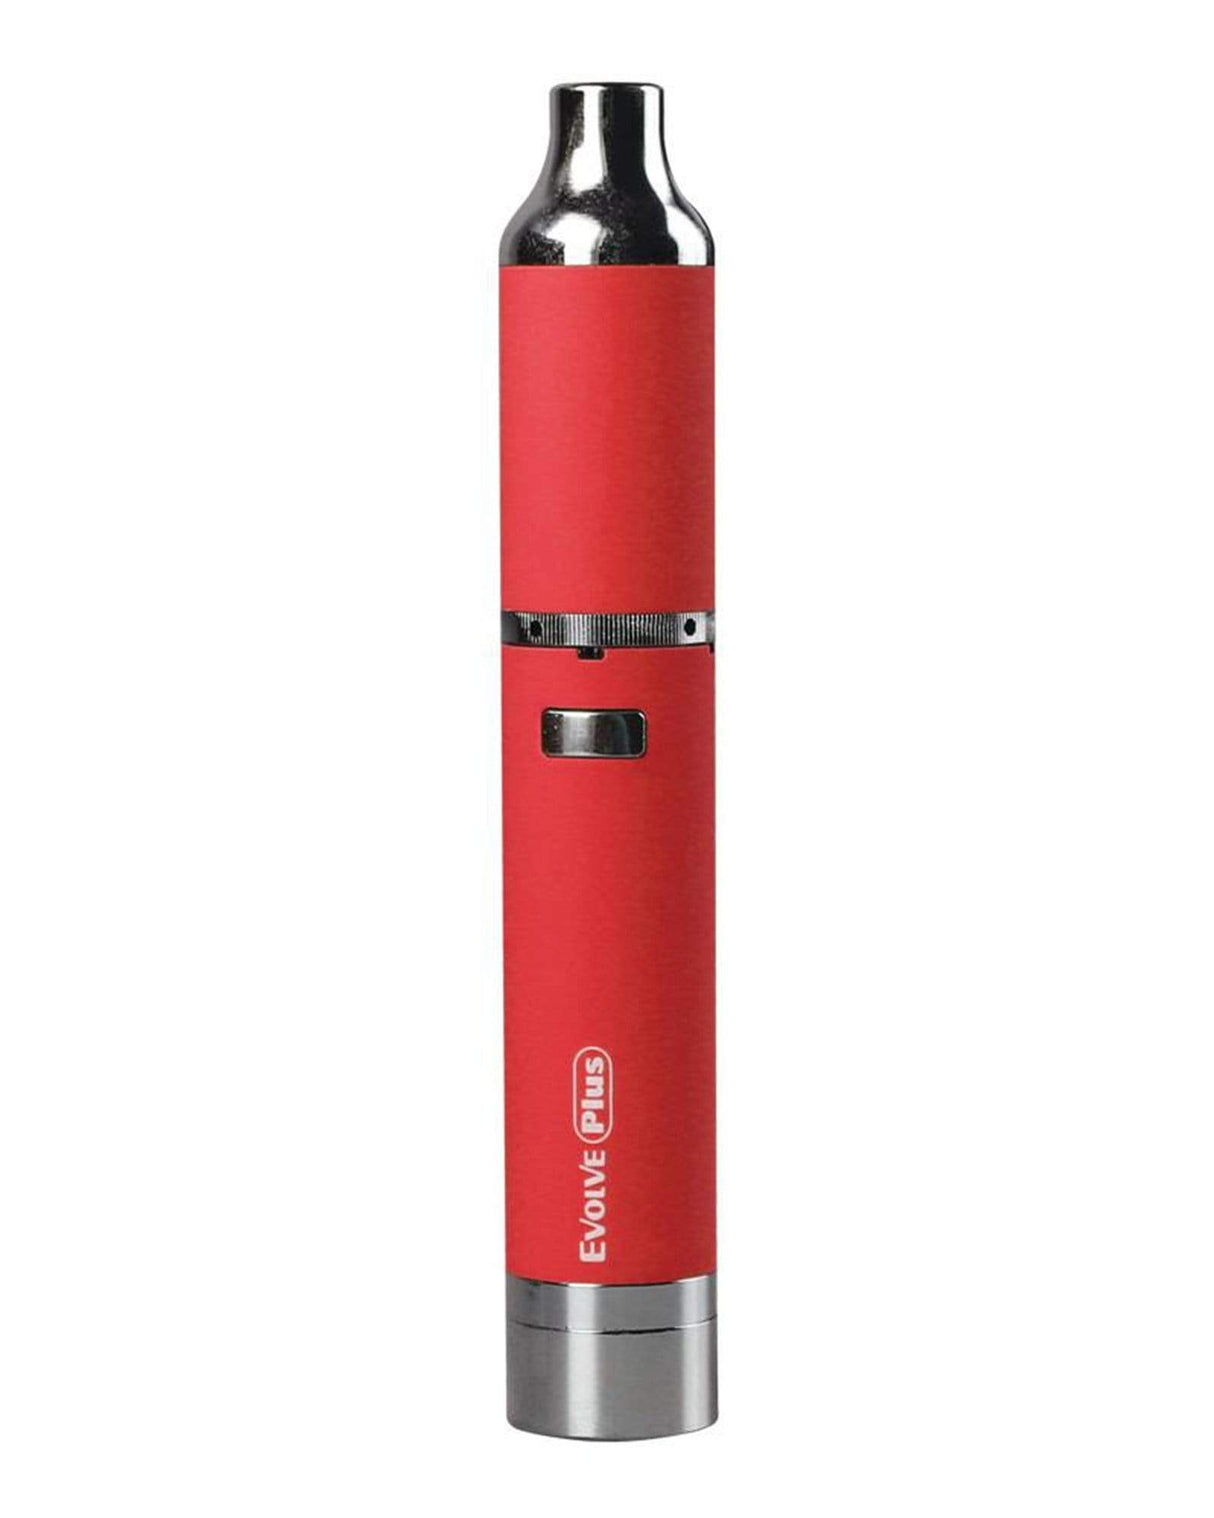 Yocan Evolve Plus Vaporizer in Red - Portable Dab/Wax Pen with 1100mAh Battery, front view